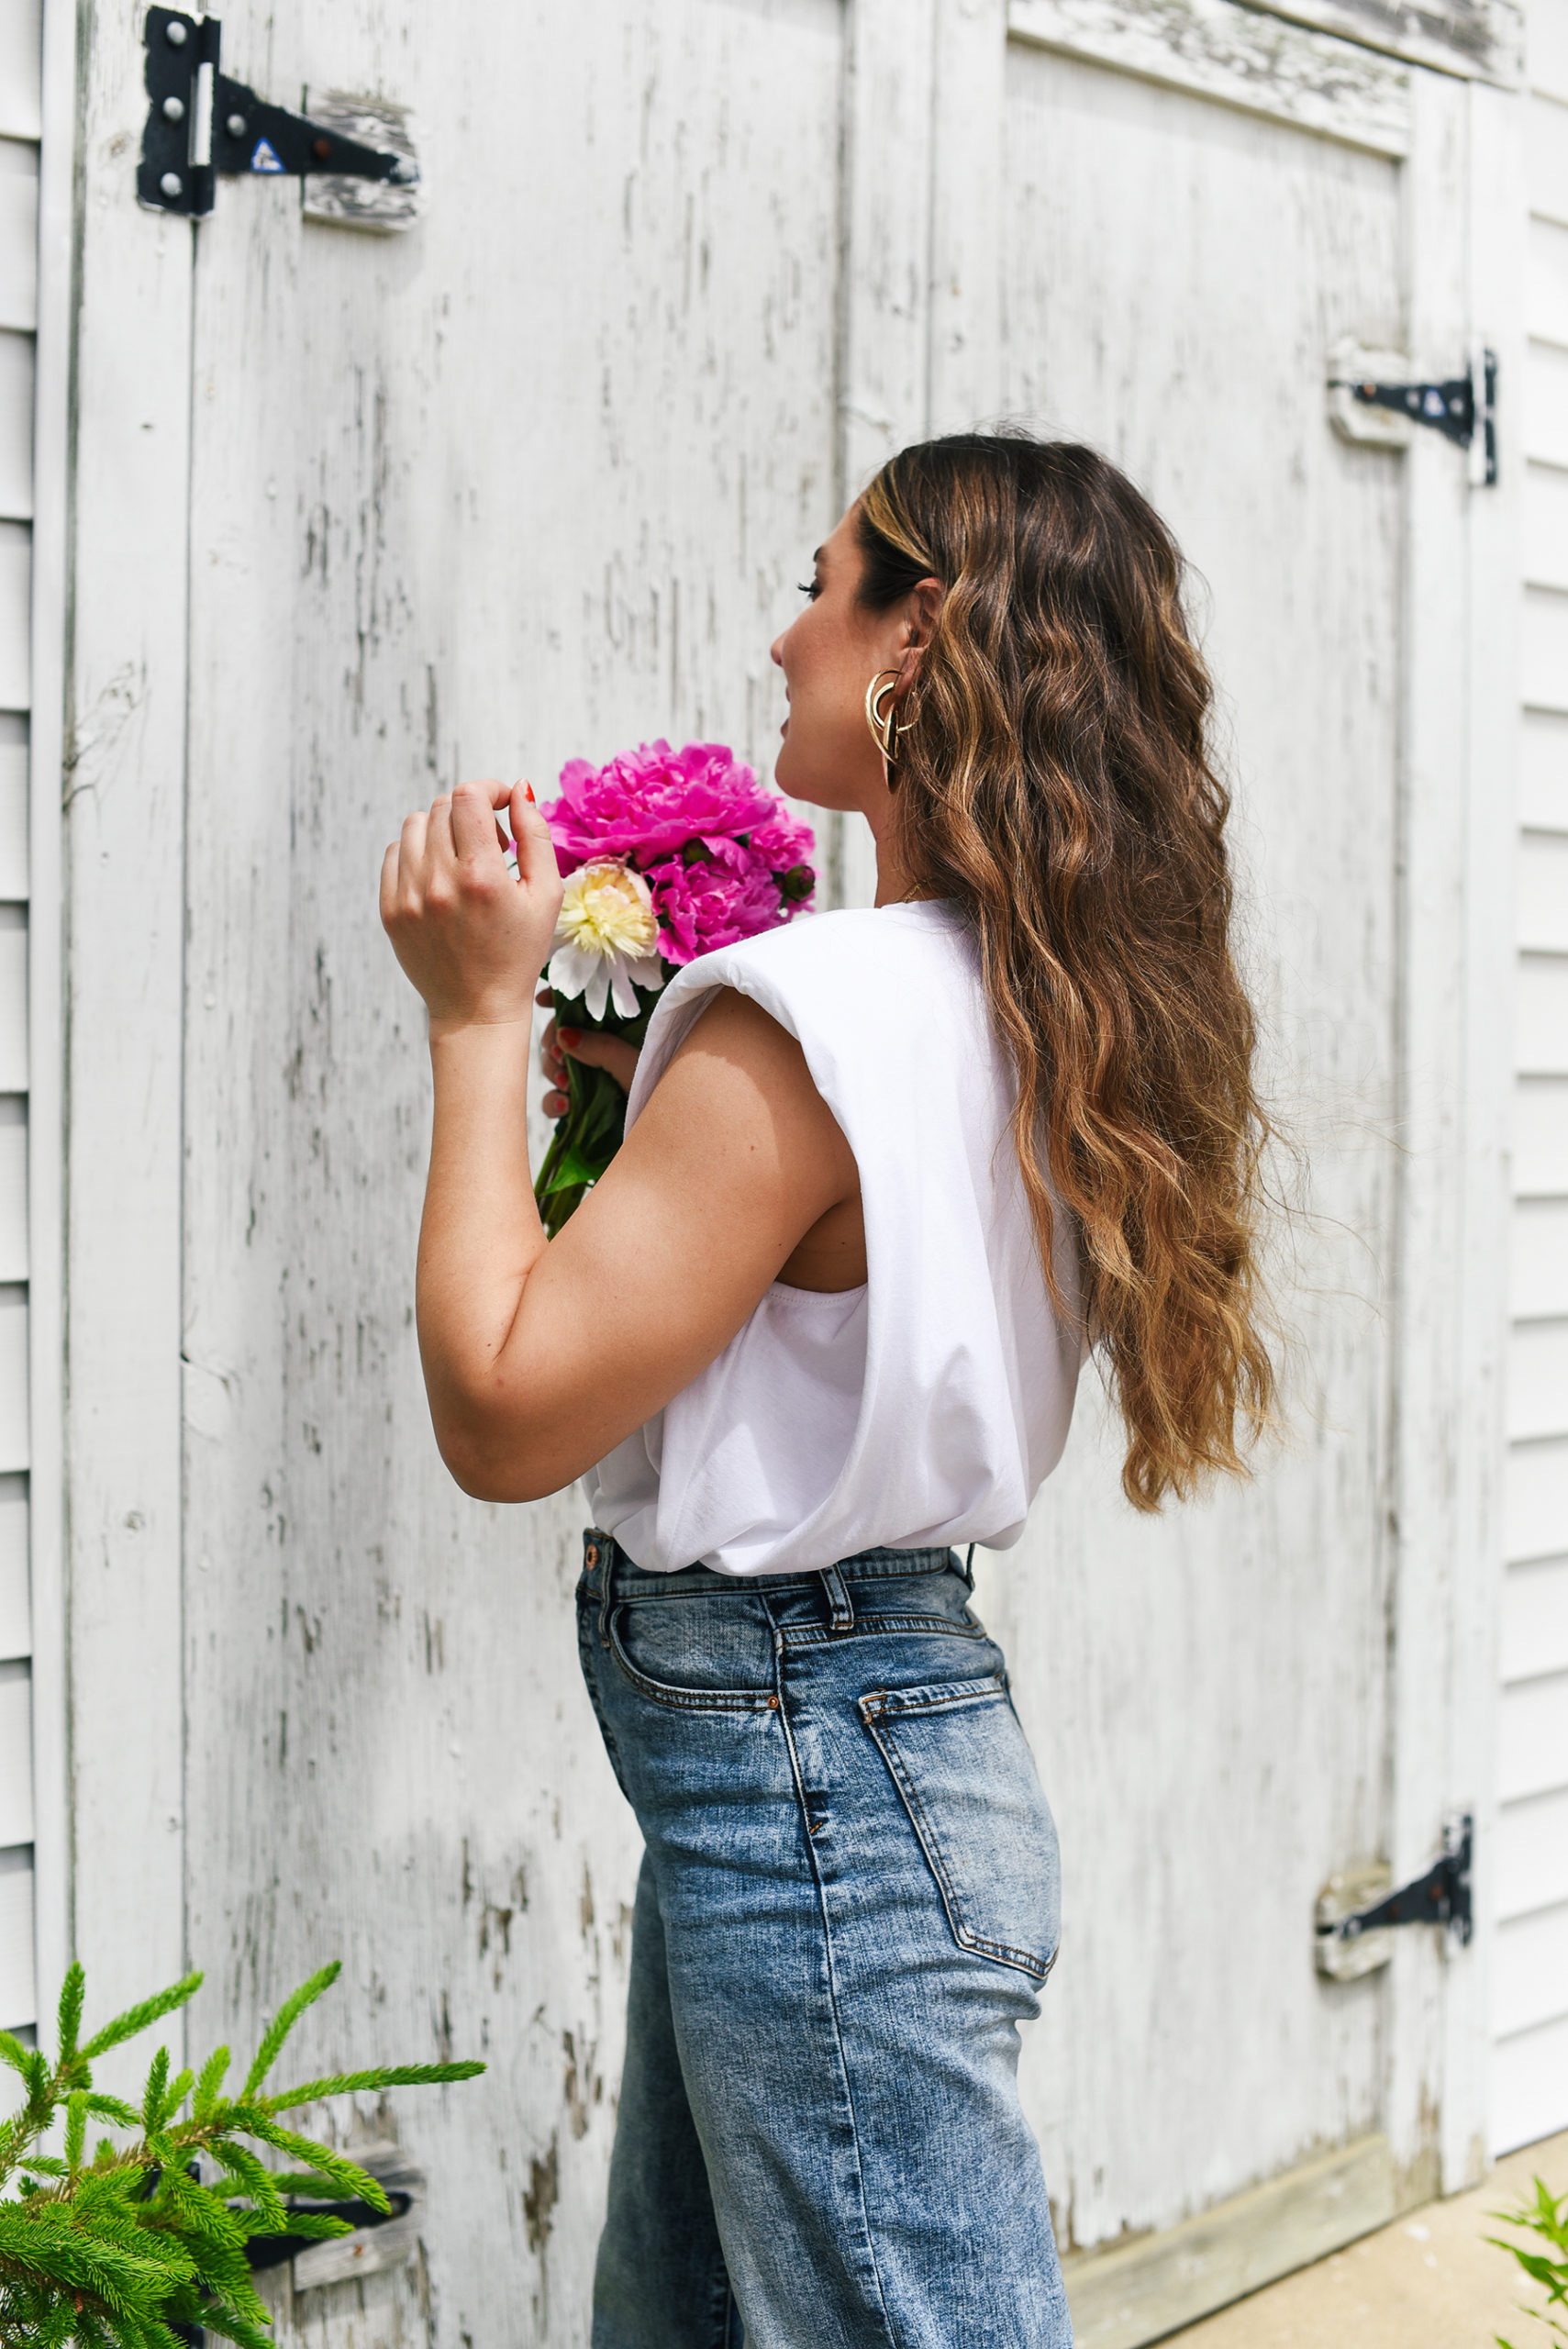 white-tee-light-blue-jeans-crimped-hair-summer-girl-easy-outfit-street-style-look-peony